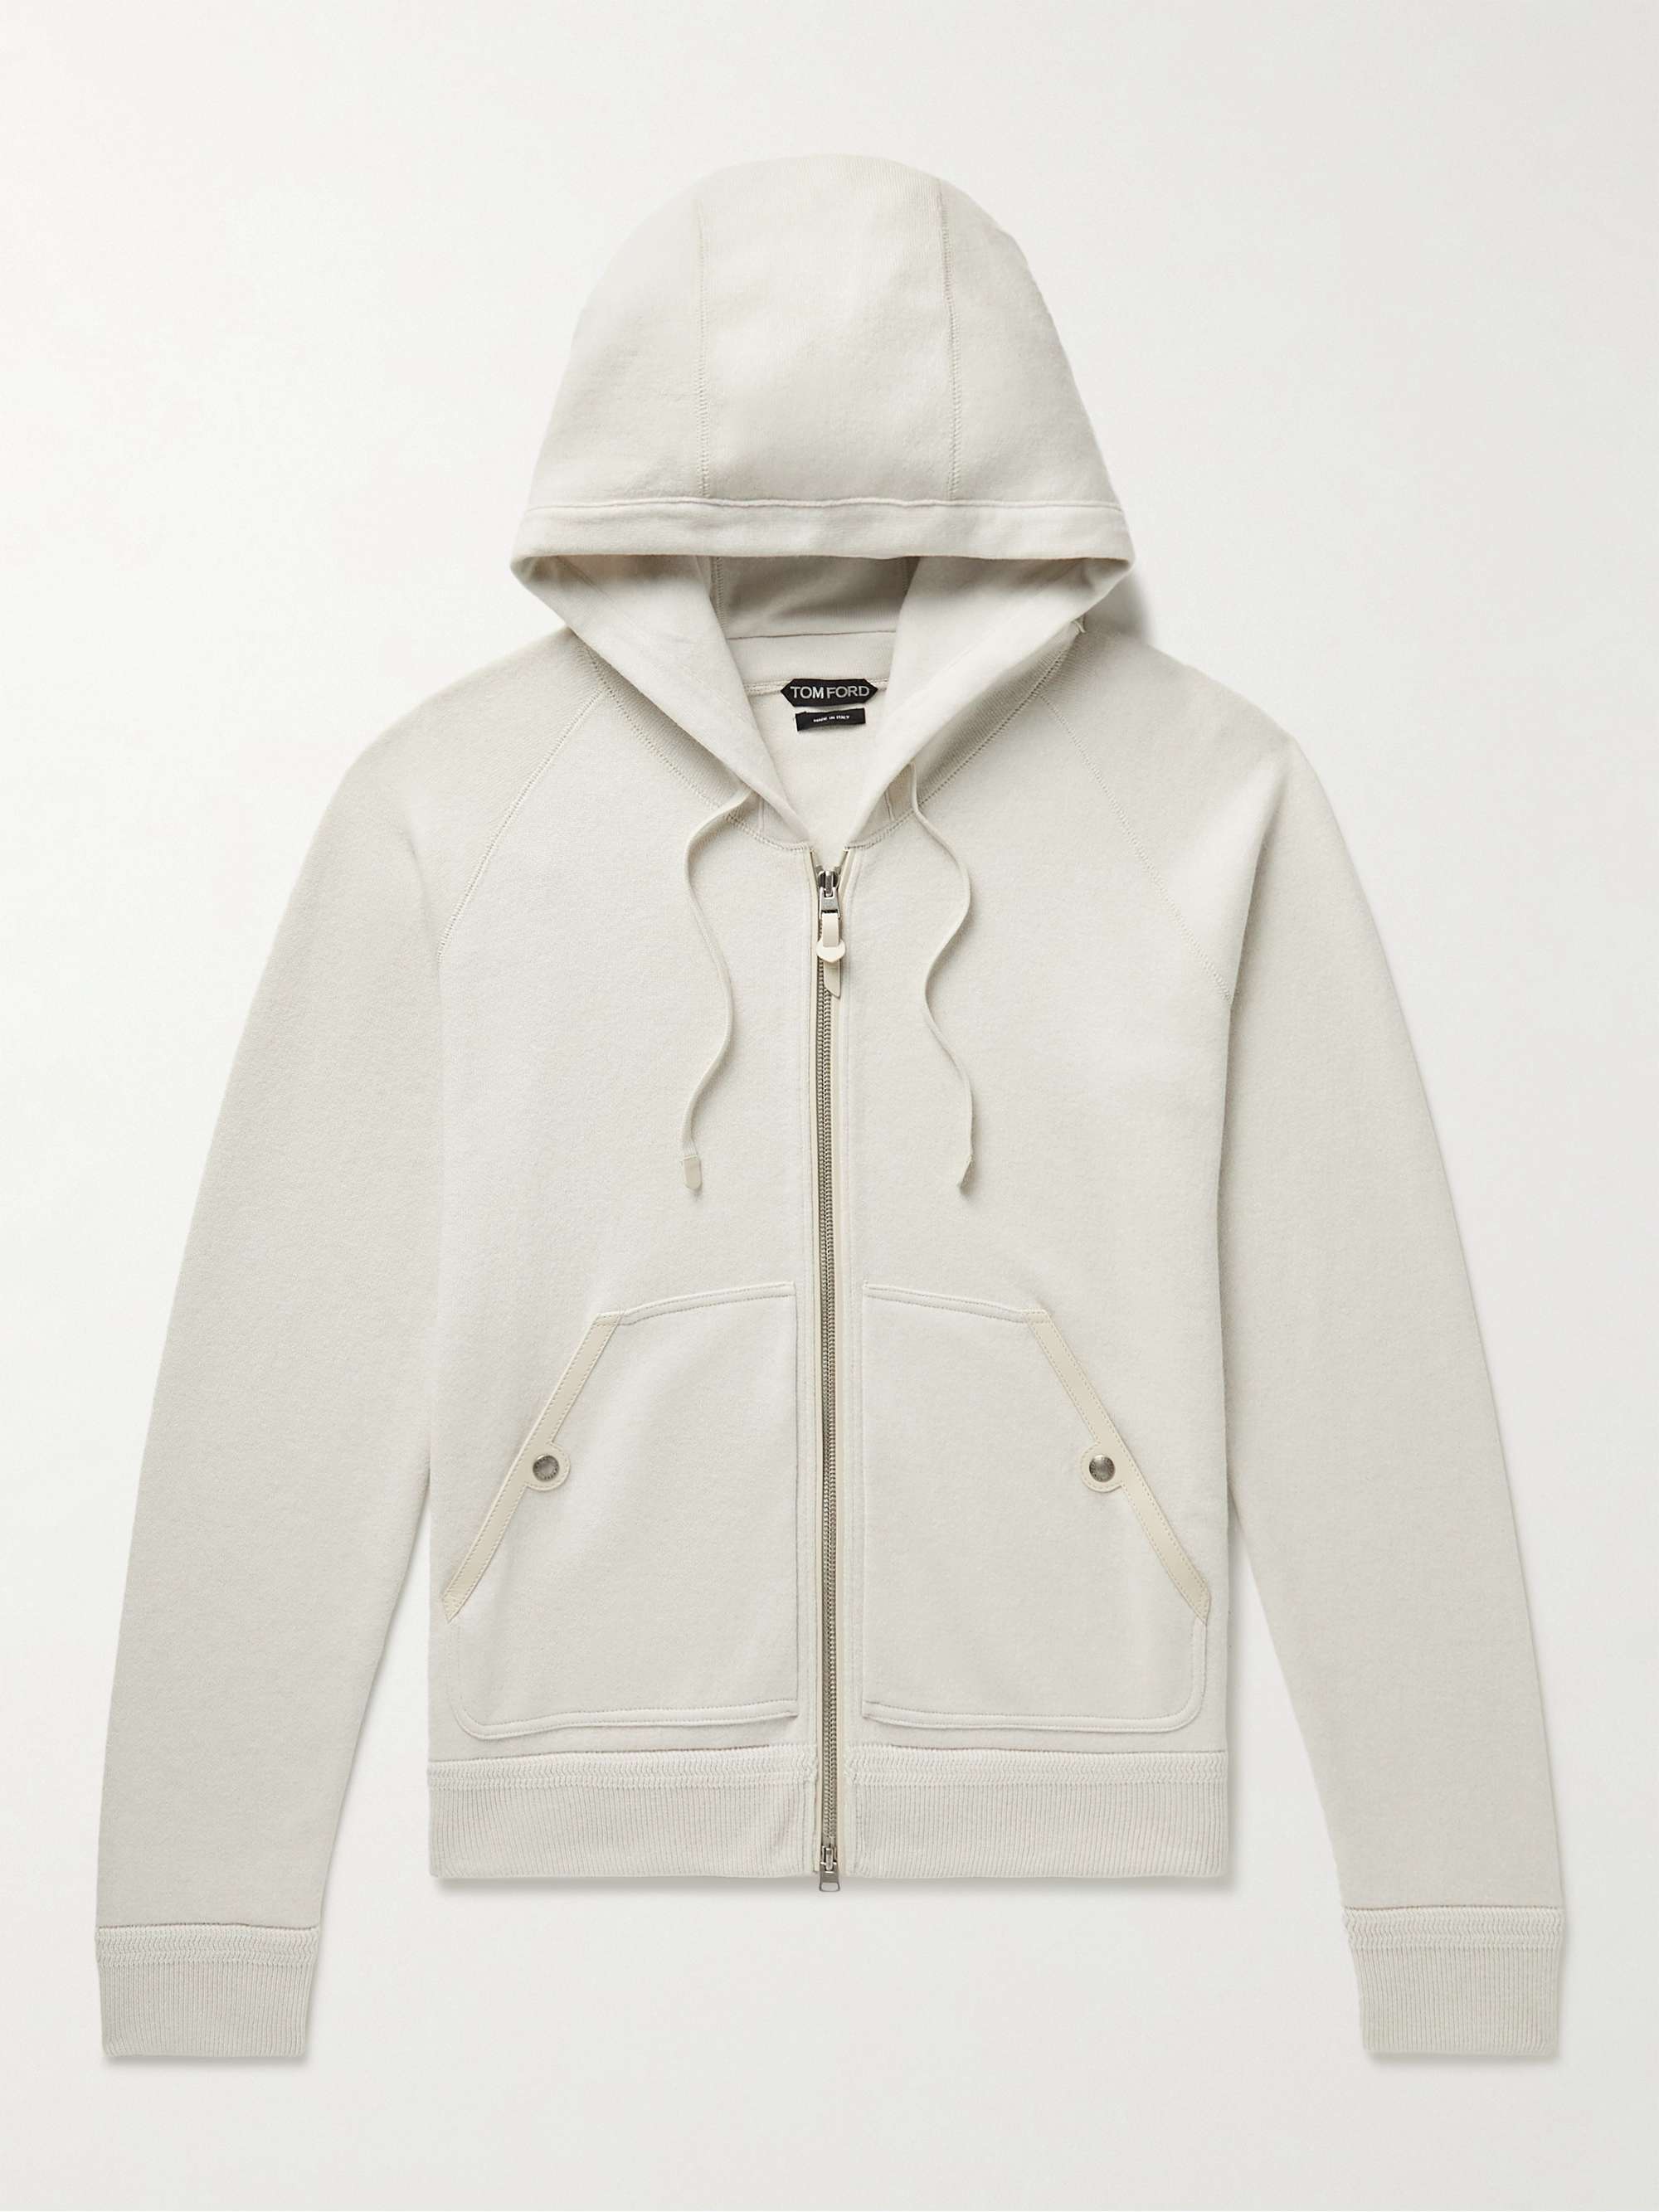 TOM FORD Leather-Trimmed Cashmere Zip-Up Hoodie